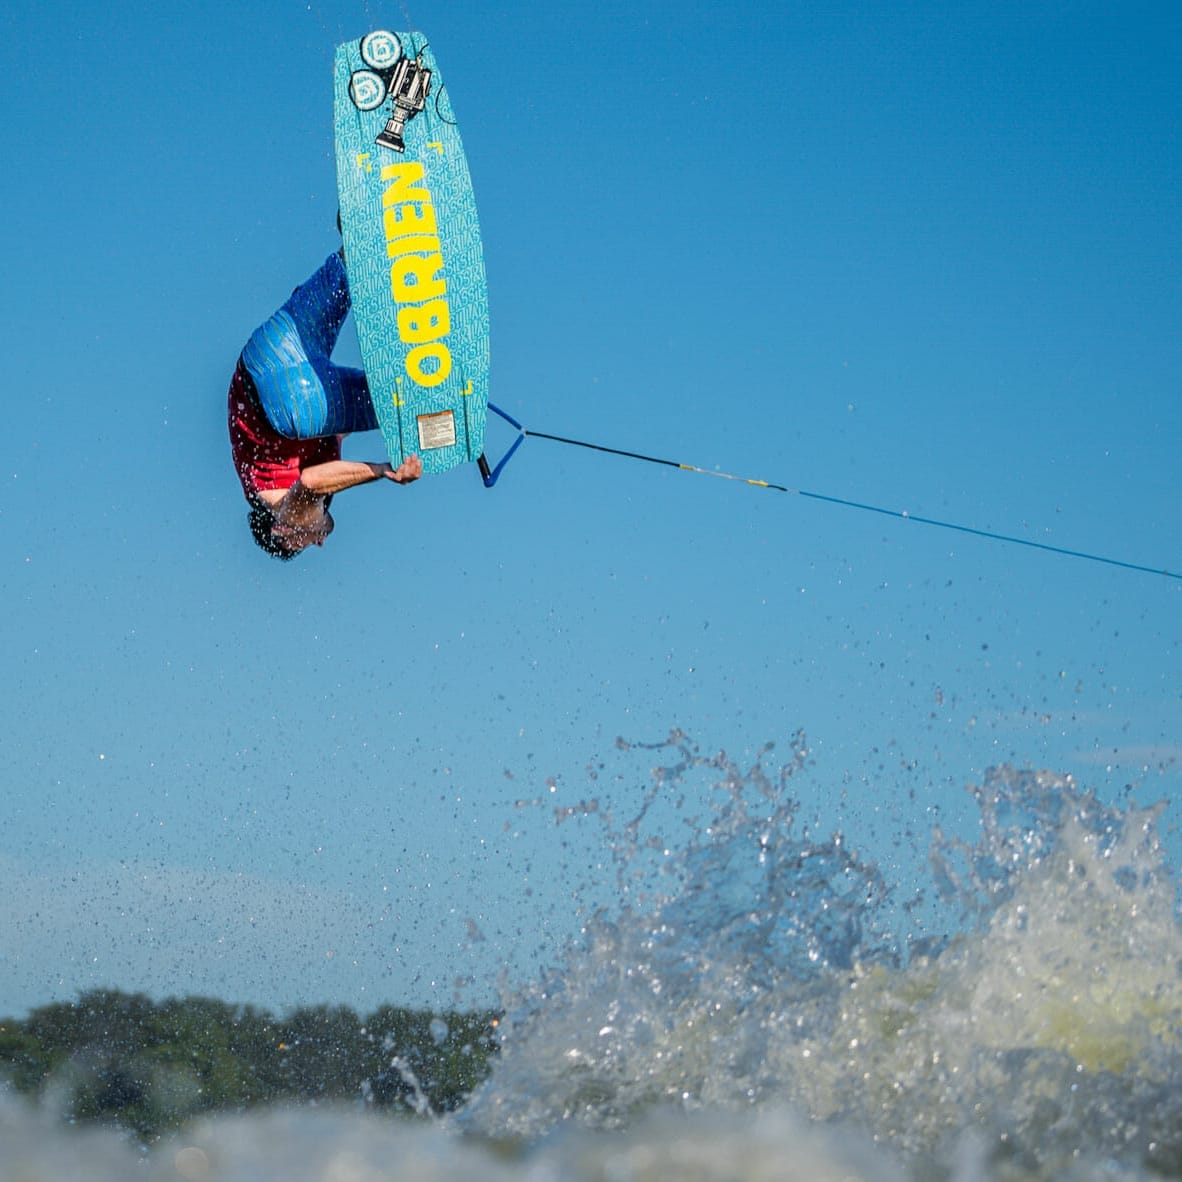 A man performing a trick on a wakesurf.